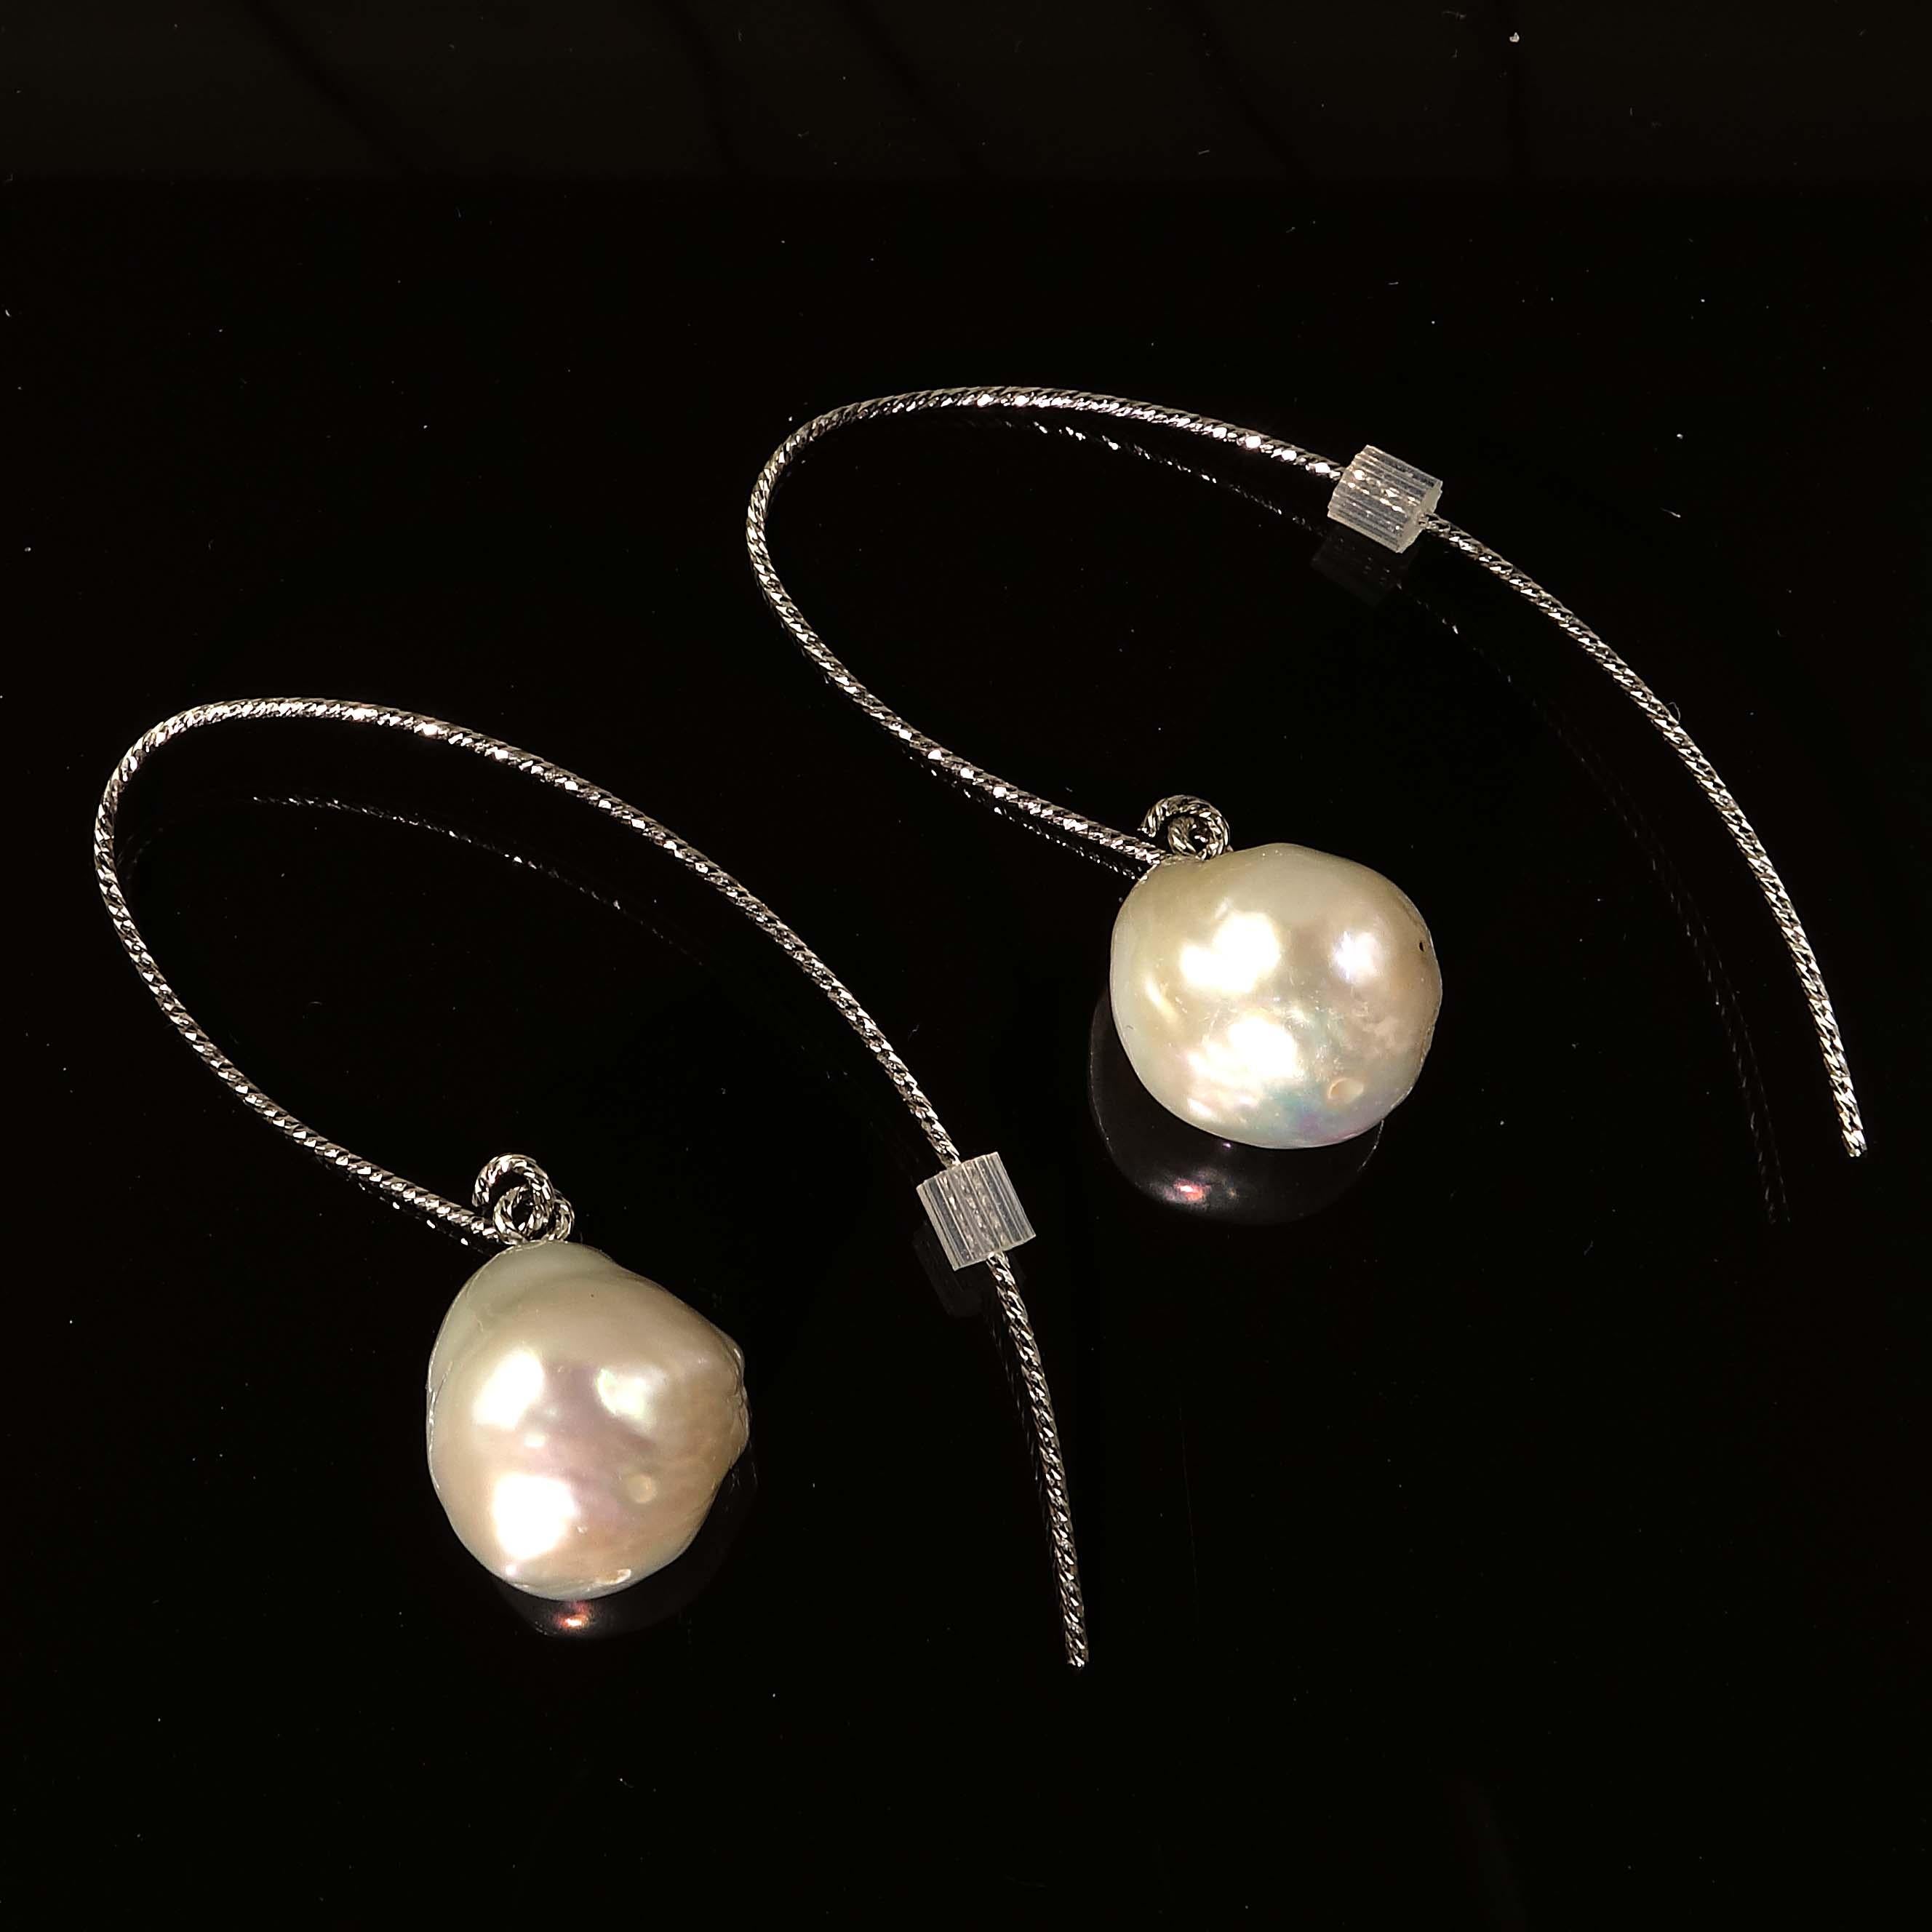 Custom made earrings of Iridescent White Baroque Pearls Dangling from twisted Sterling Silver Hooks.  The twisted wire sparkles and enhances the pearls. The Pearls are off Round and flash lovely shades of pink and yellow.  The Sterling Silver wires